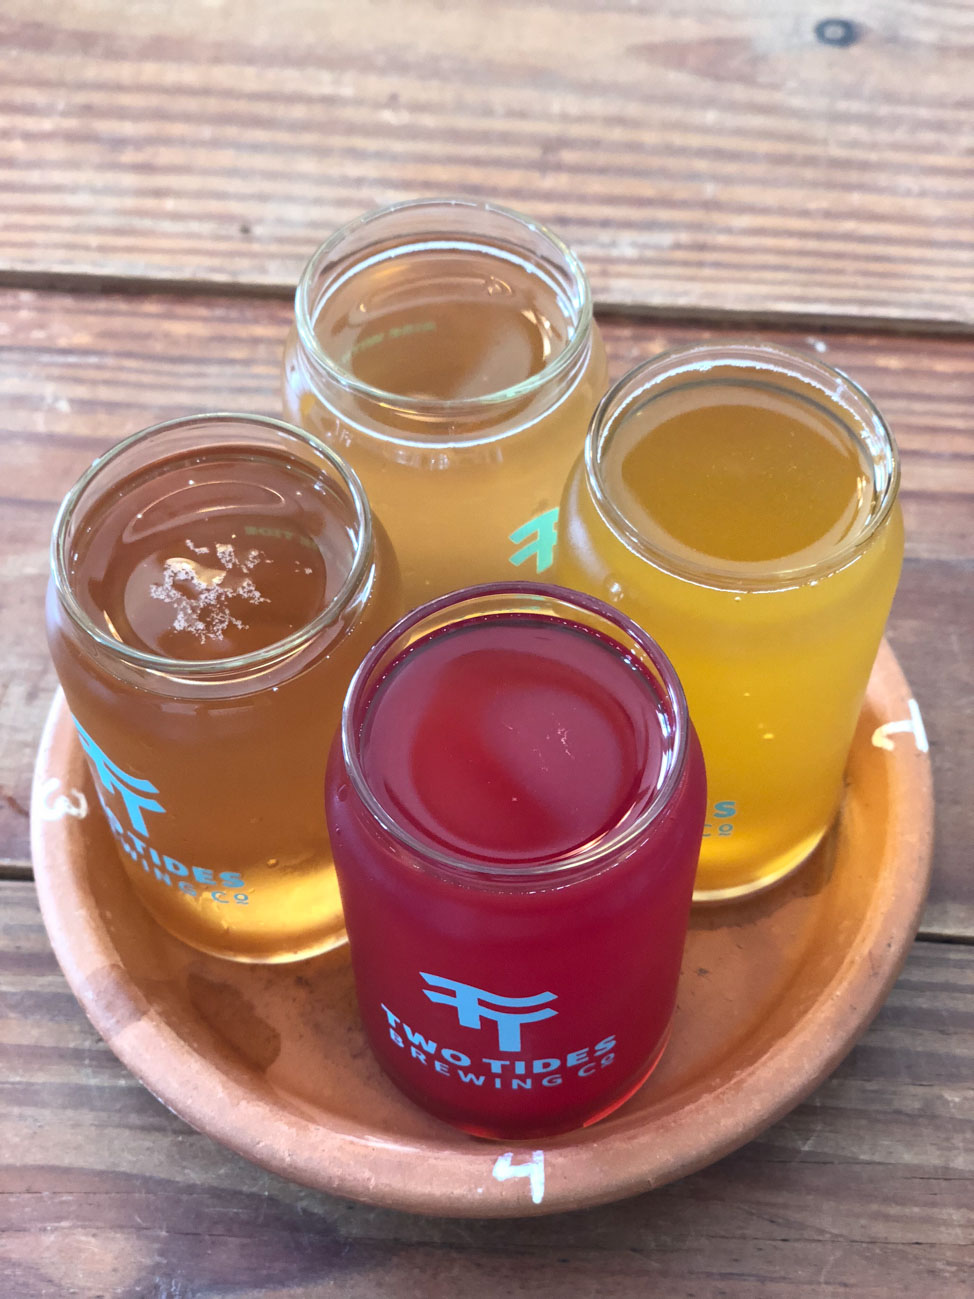 Two Tides Brewing Co. in Savannah